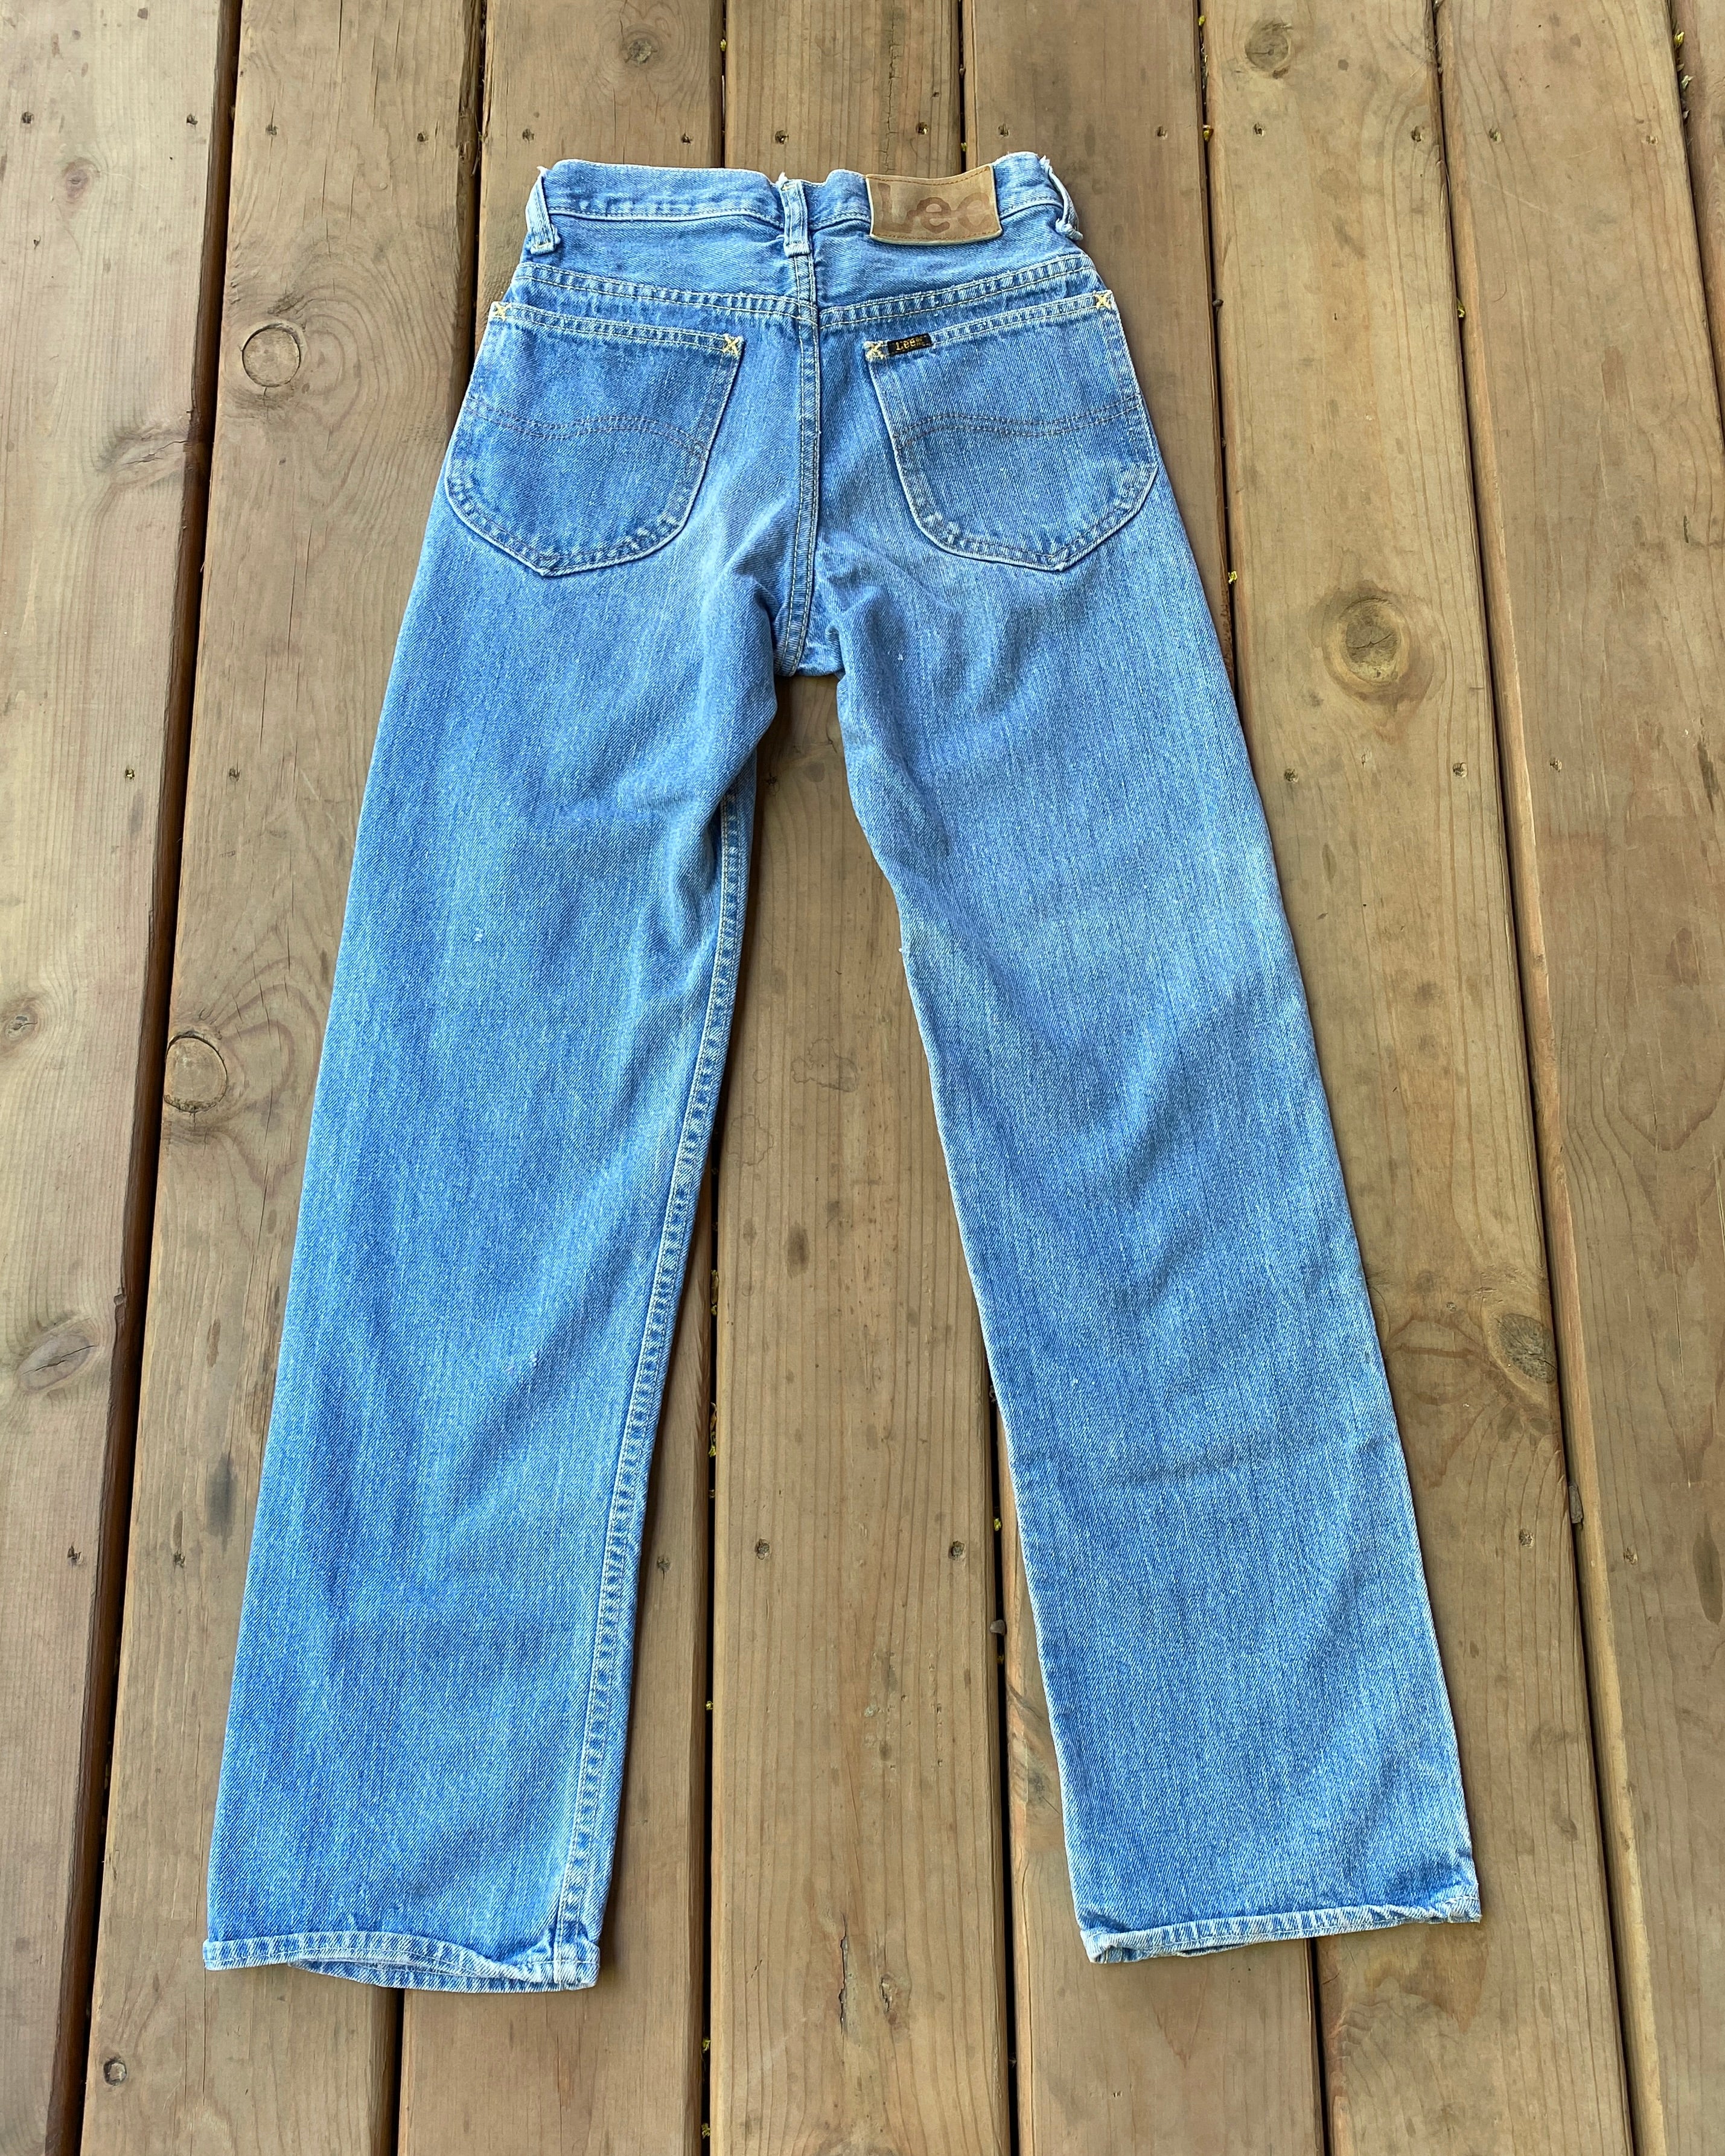 Vintage 1970s LEE RIDERS Medium Wash Distressed Jeans 24 Made in USA